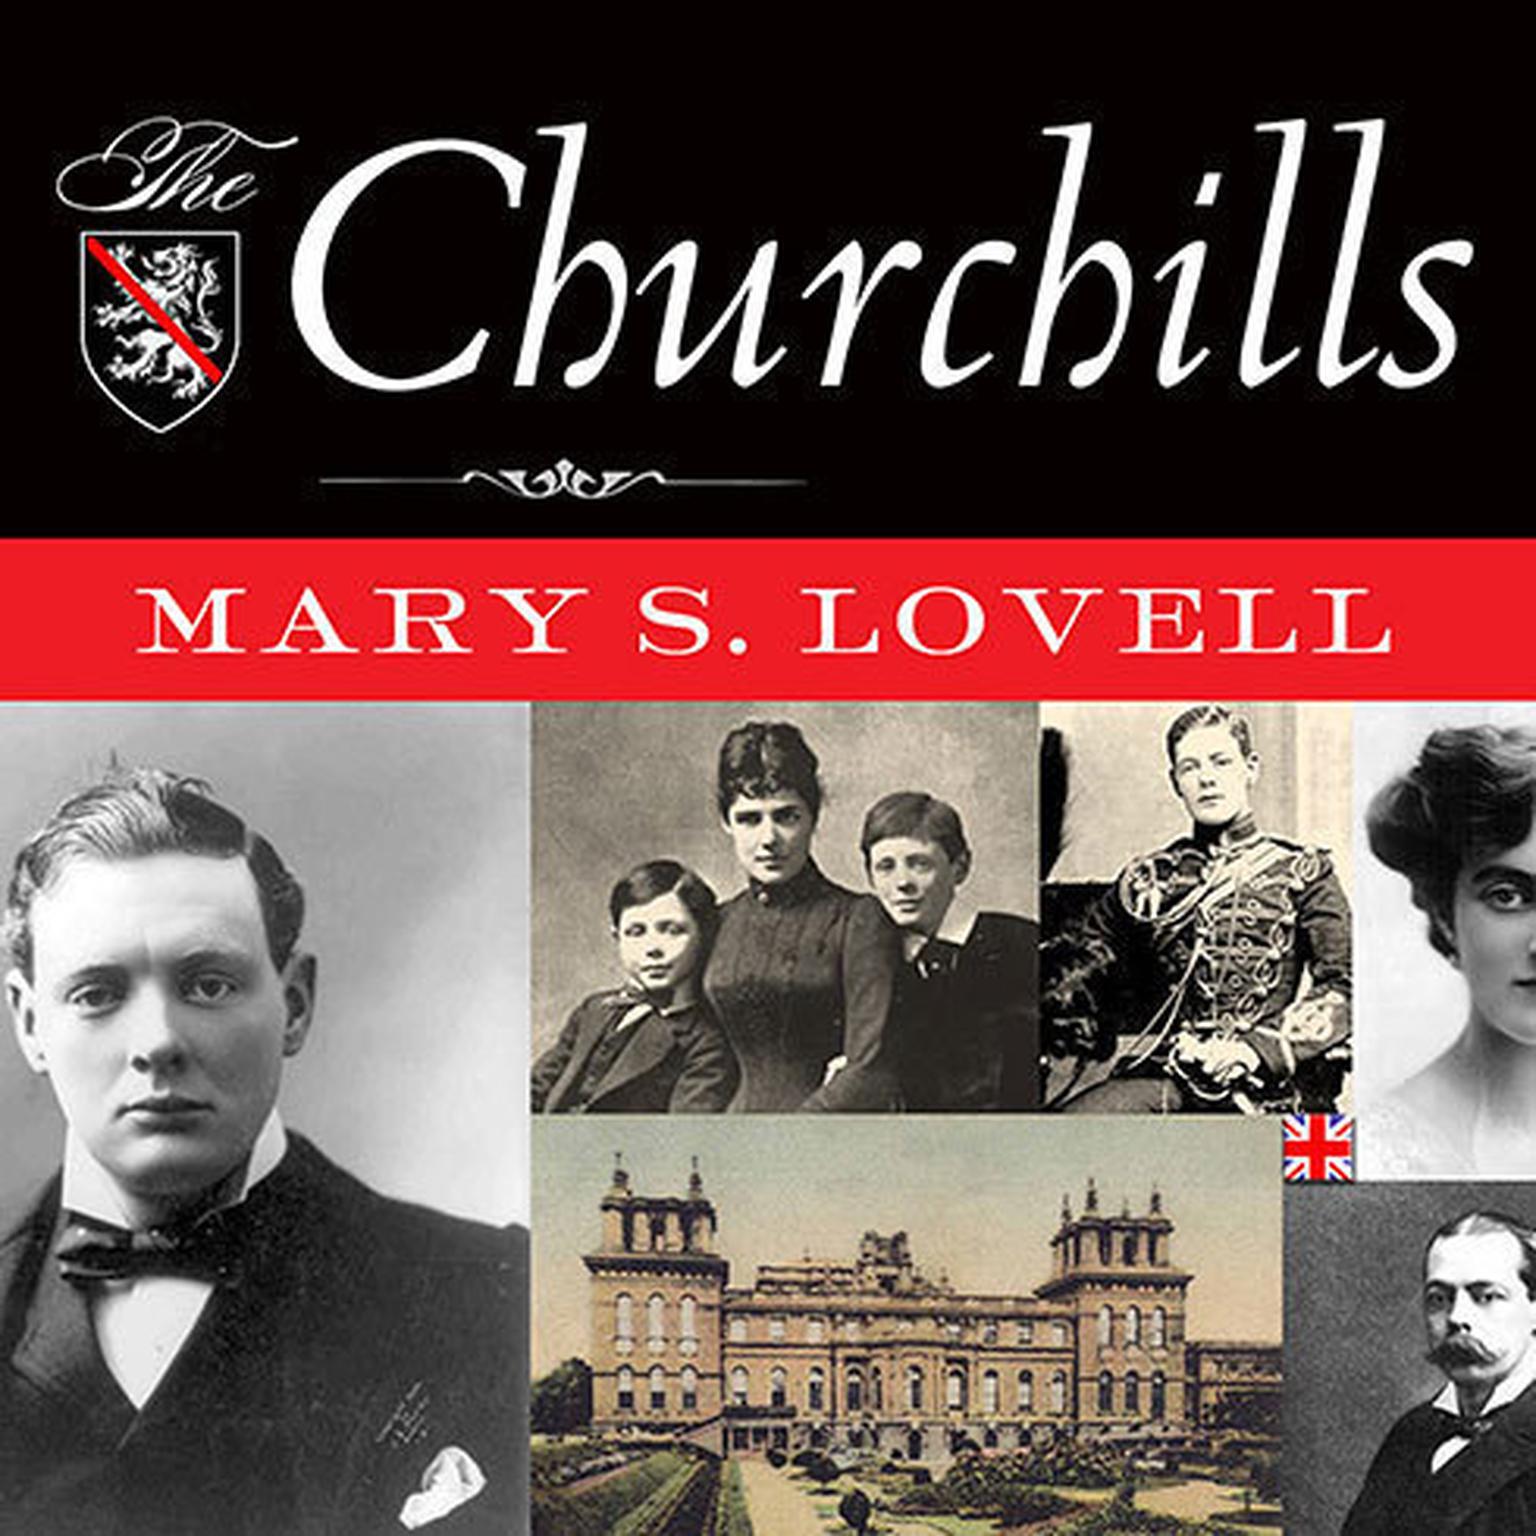 The Churchills: In Love and War Audiobook, by Mary S. Lovell